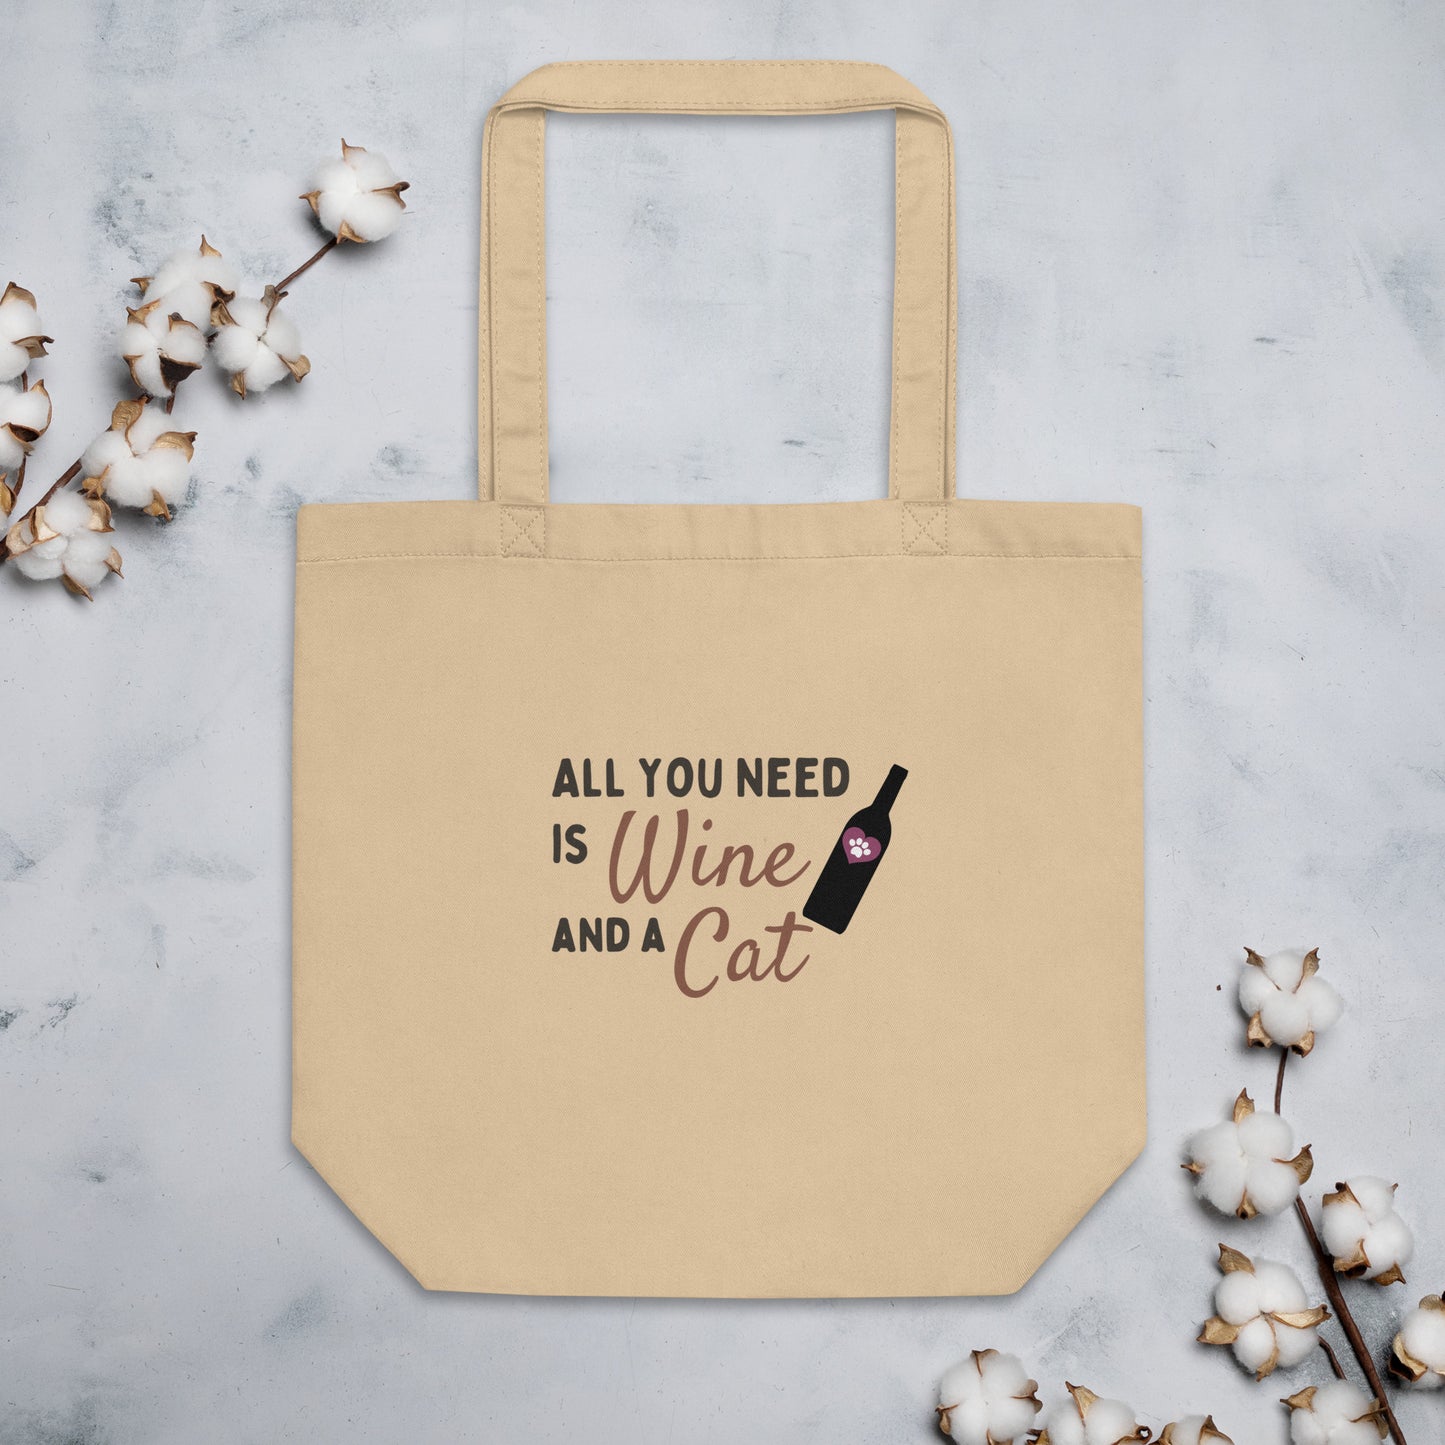 All you need is Wine and a Cat - Tote Bag